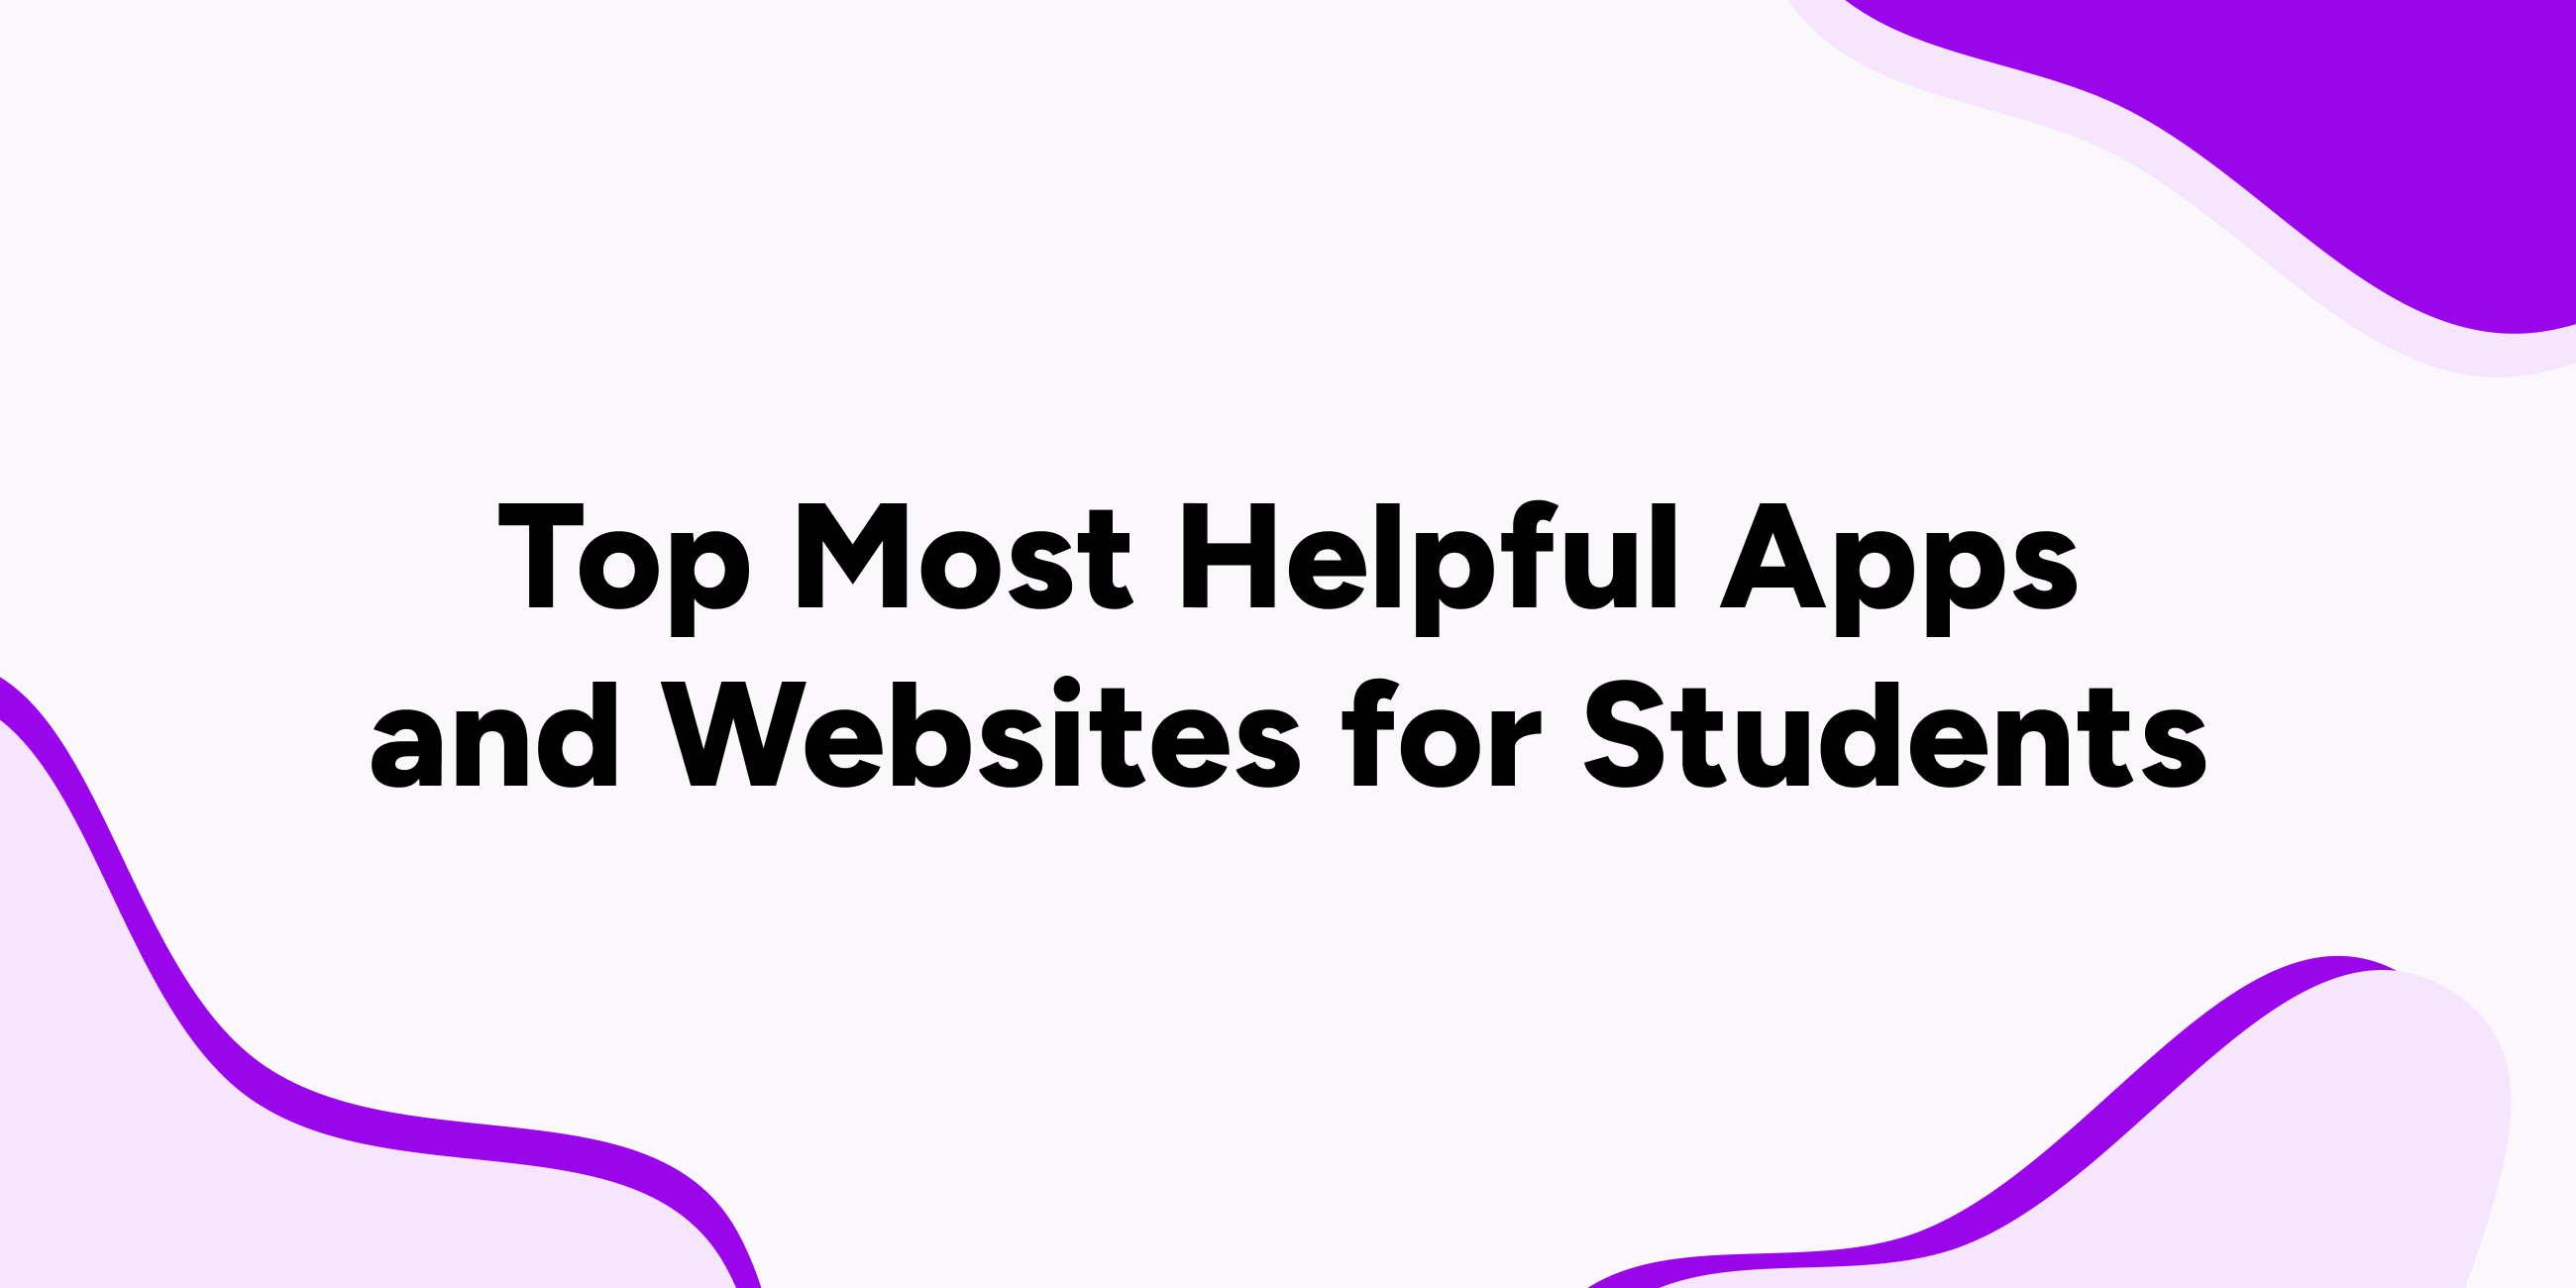 Top Most Helpful Apps and Websites for Students